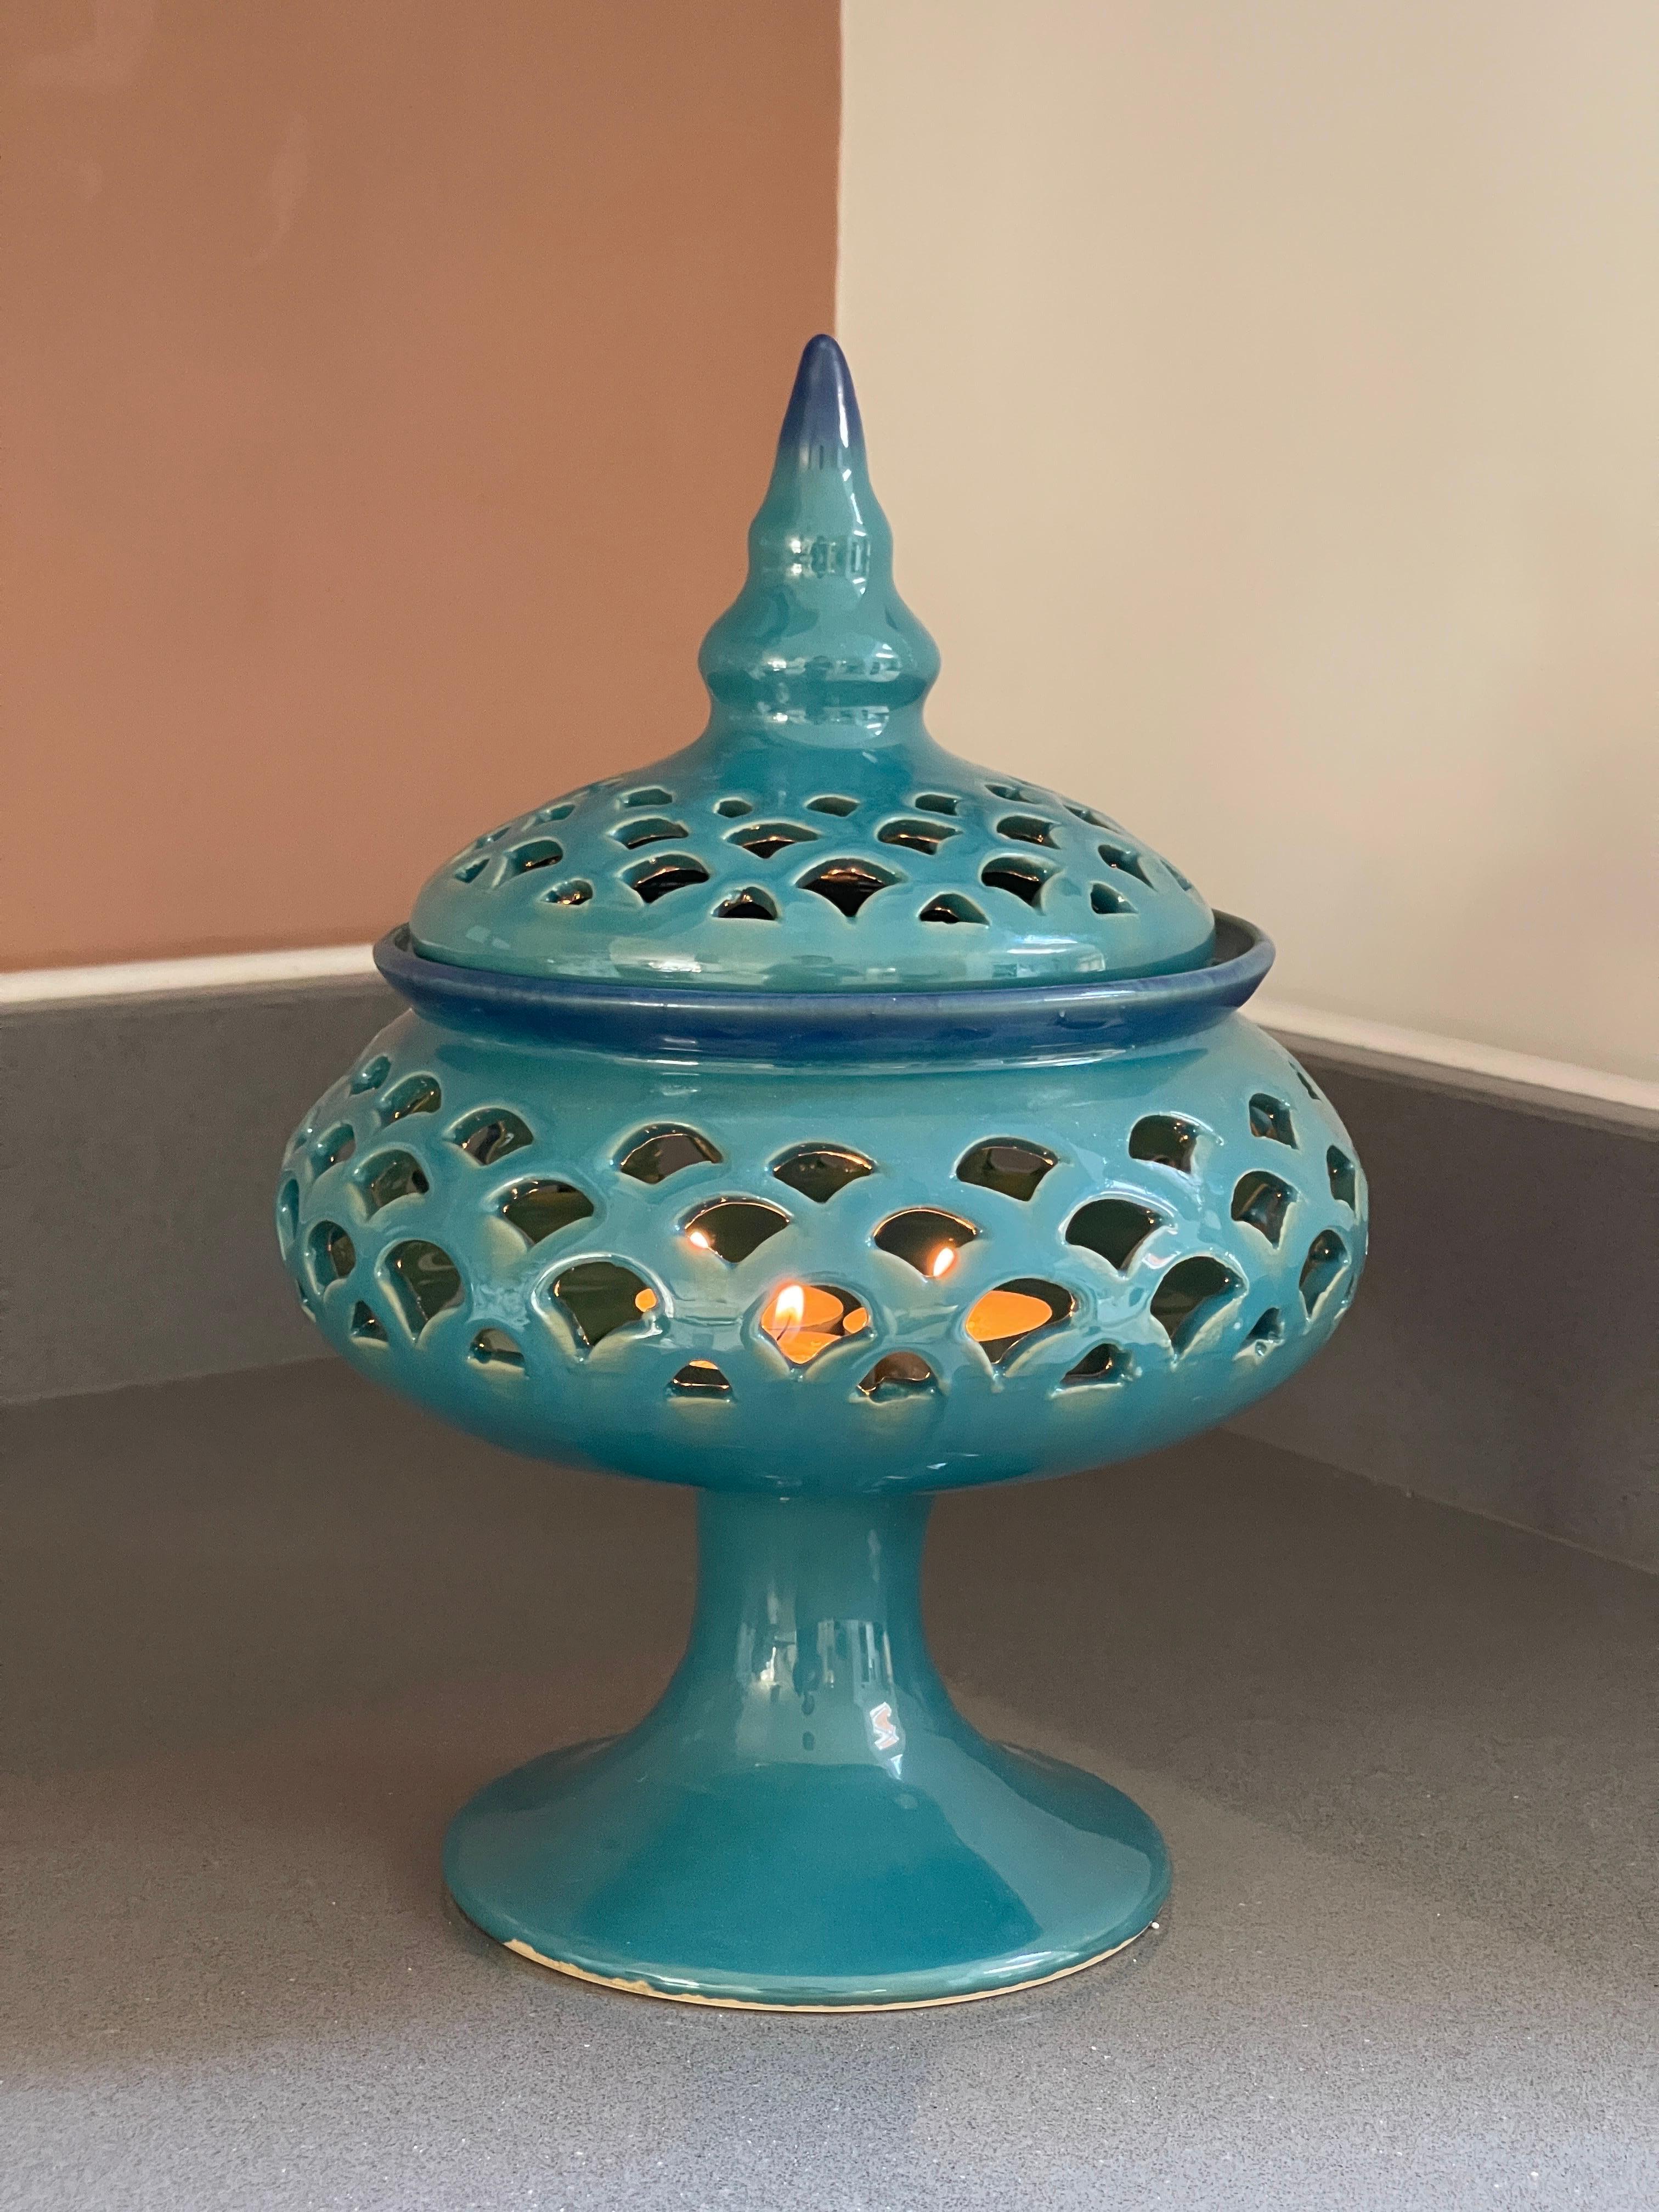 Candle Holder Hand Crafted Blue Ceramic Torches With Stand &Lid 4